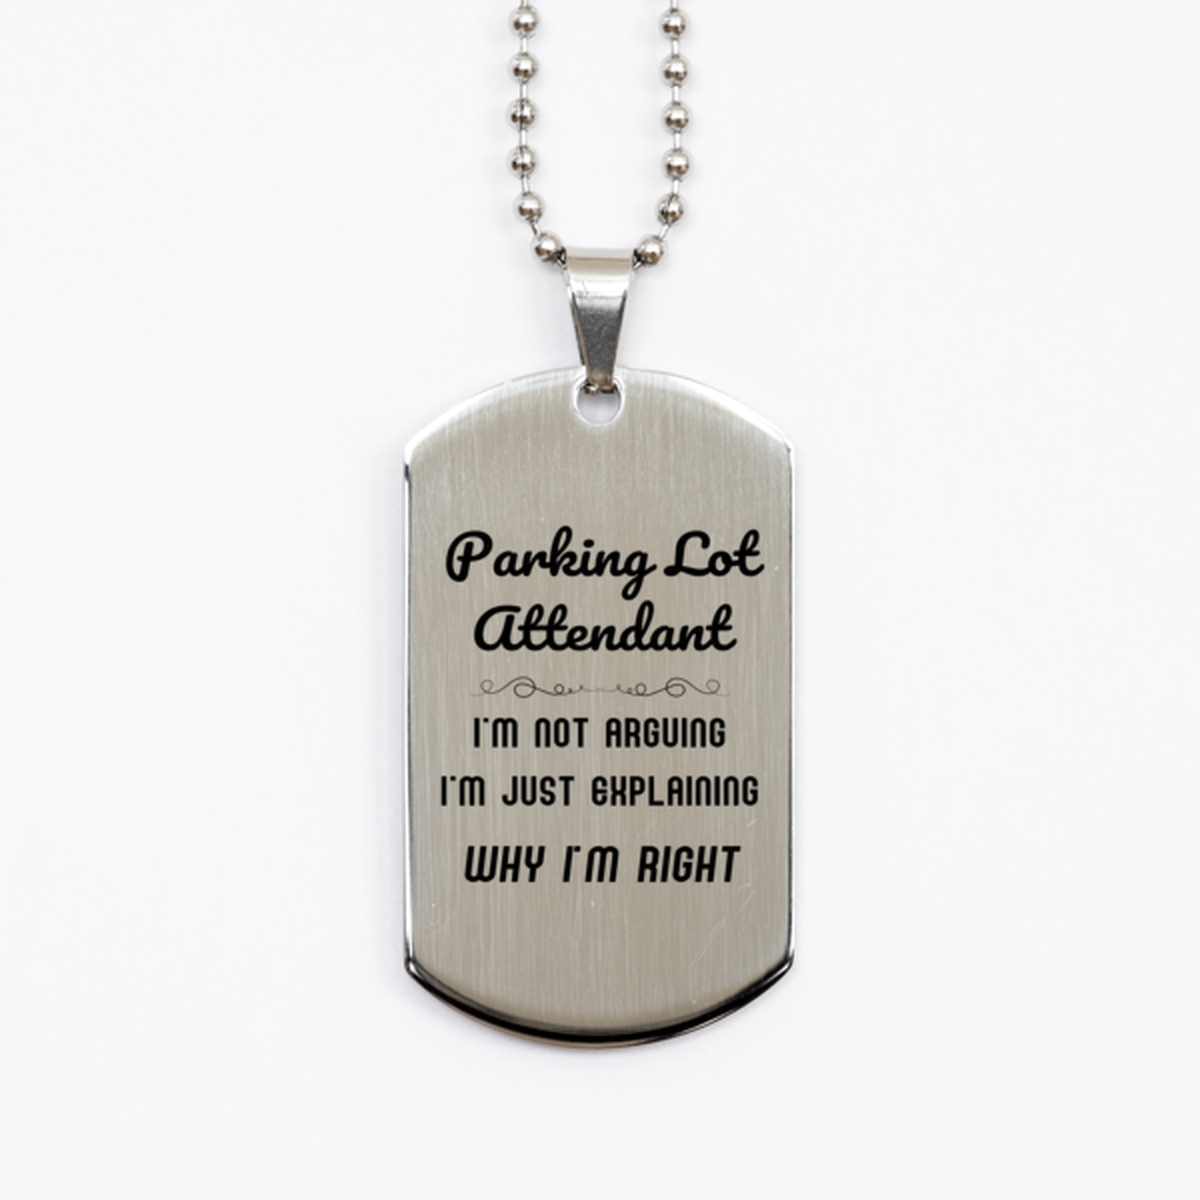 Parking Lot Attendant I'm not Arguing. I'm Just Explaining Why I'm RIGHT Silver Dog Tag, Funny Saying Quote Parking Lot Attendant Gifts For Parking Lot Attendant Graduation Birthday Christmas Gifts for Men Women Coworker